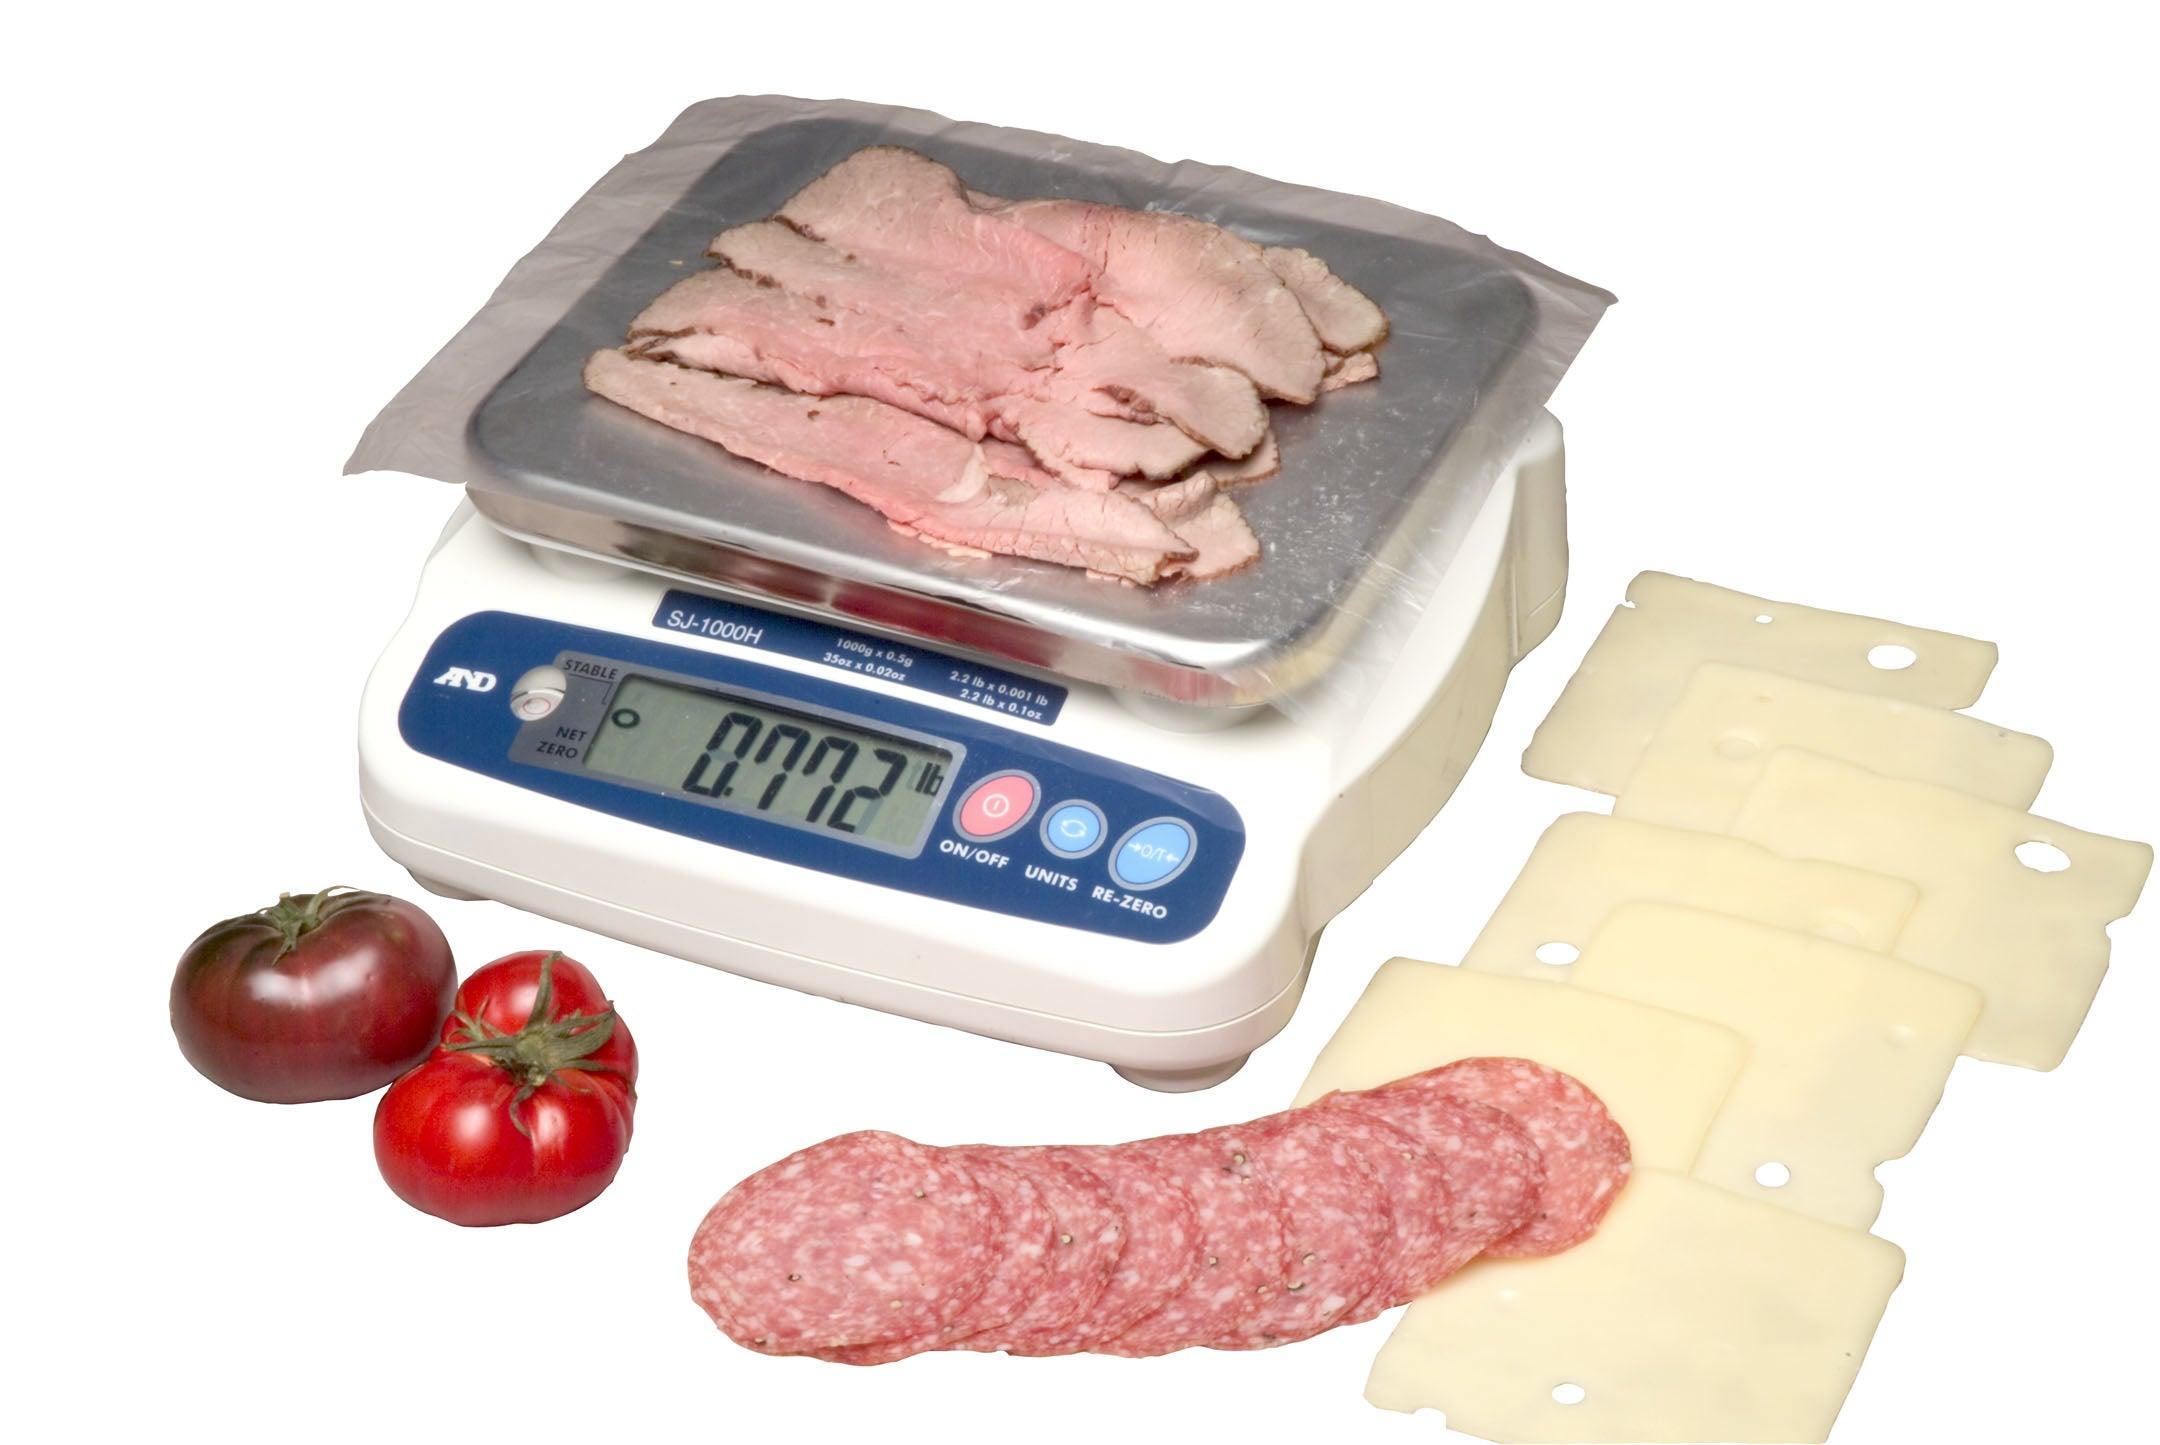 A&D Weighing SJ-5001HS Digital Portion Scale, 5000g x 1g with Warranty